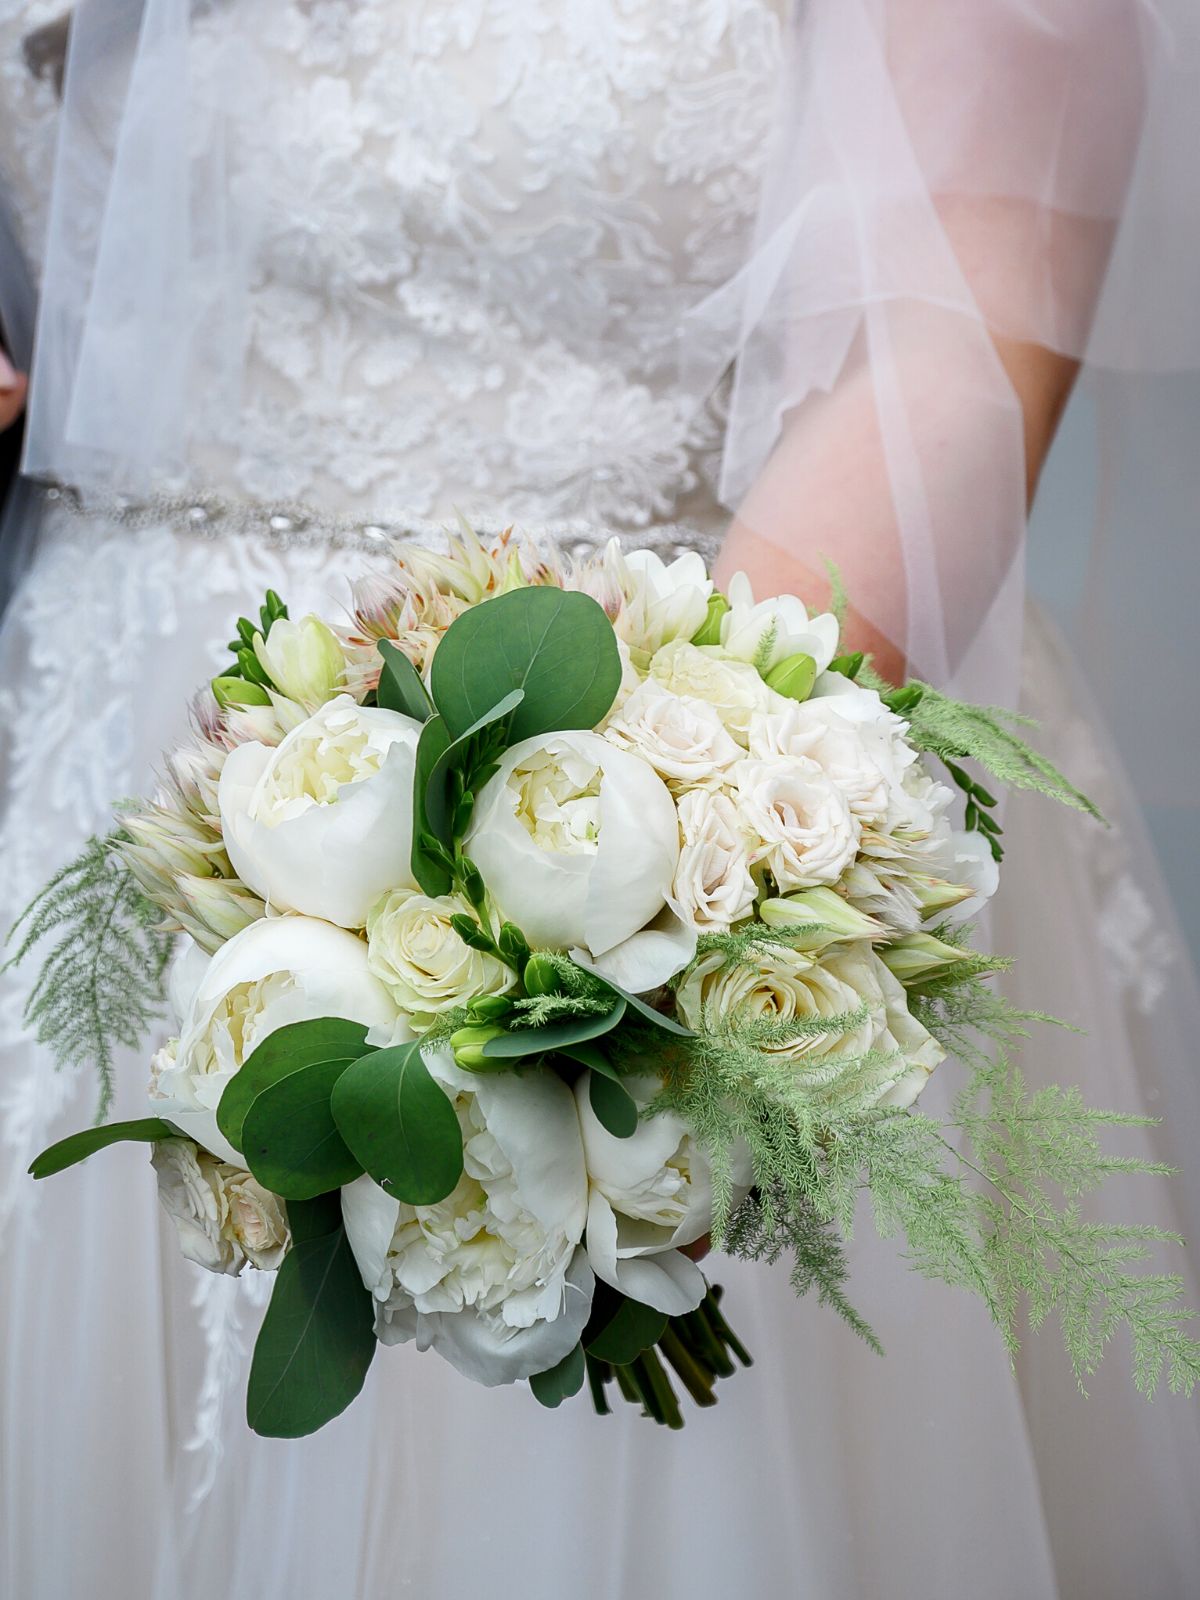 Wedding Bouquet With Blushing Bride - on Thursd